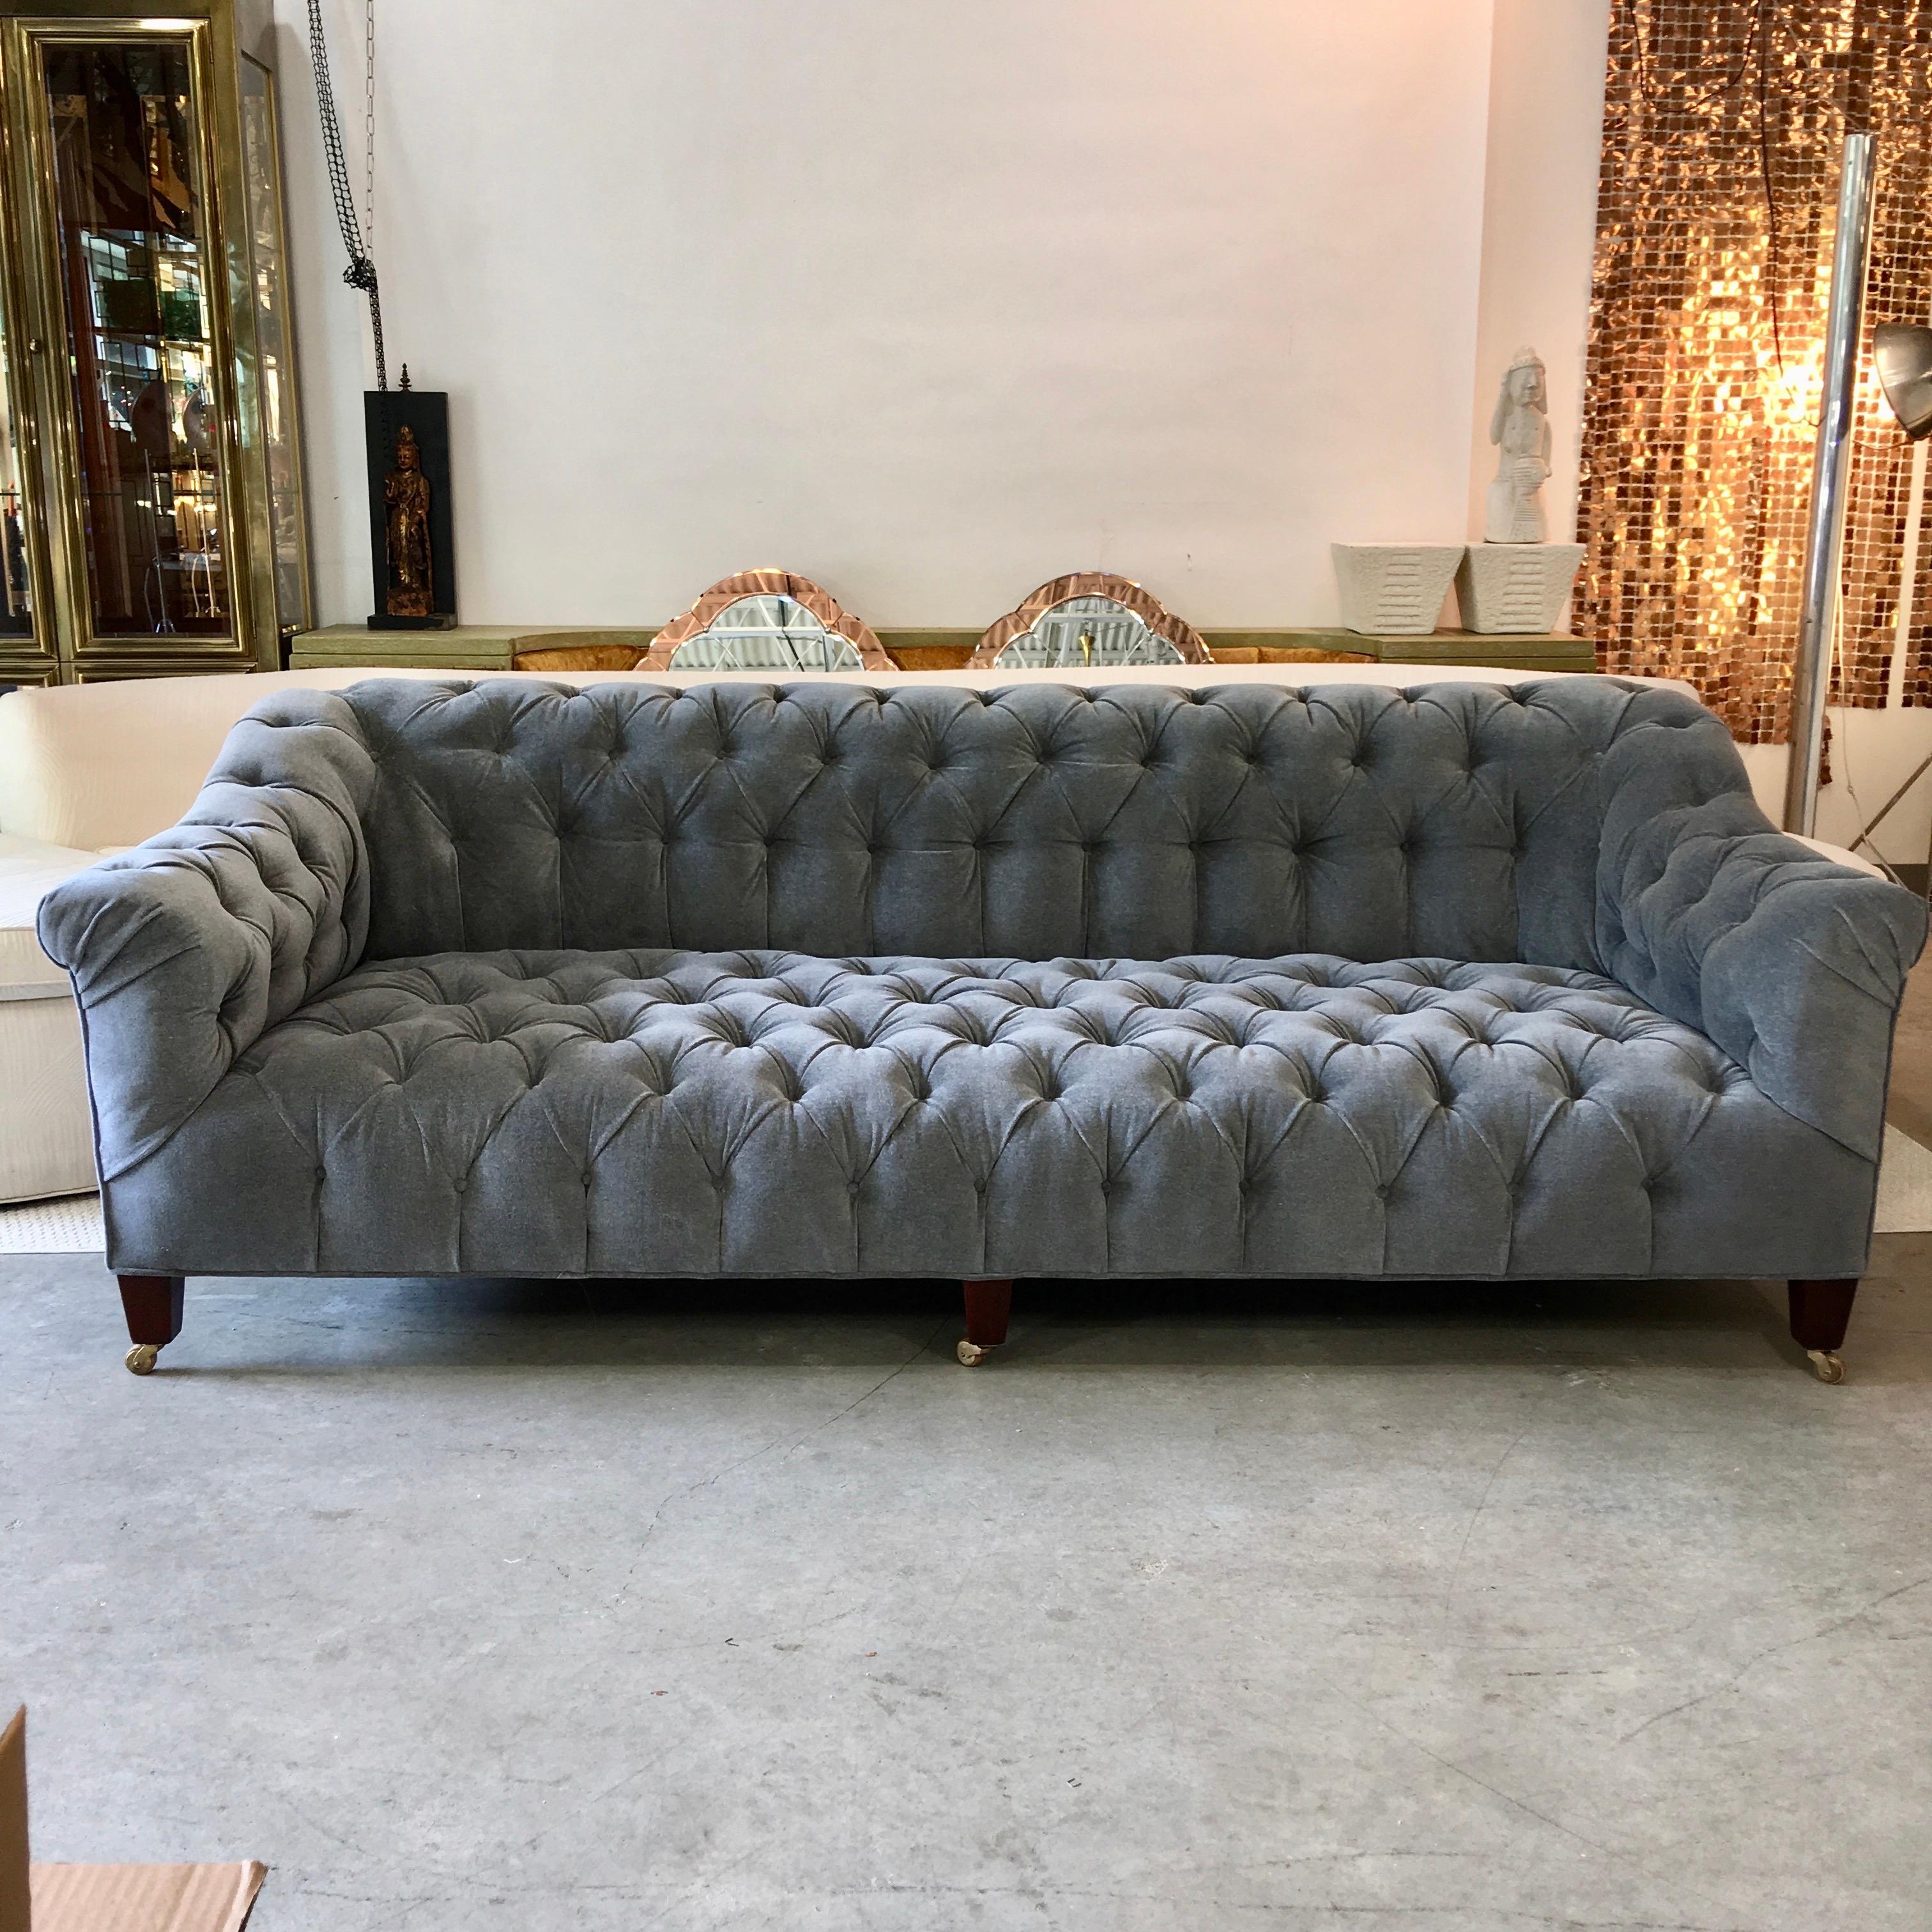 Late 19th century Chesterfield club sofa on six tapered block mahogany legs with brass casters with wooden wheels, newly reupholstered in luxurious grey mohair with deep button tufts.
They don't make them like this anymore! This solidly built sofa